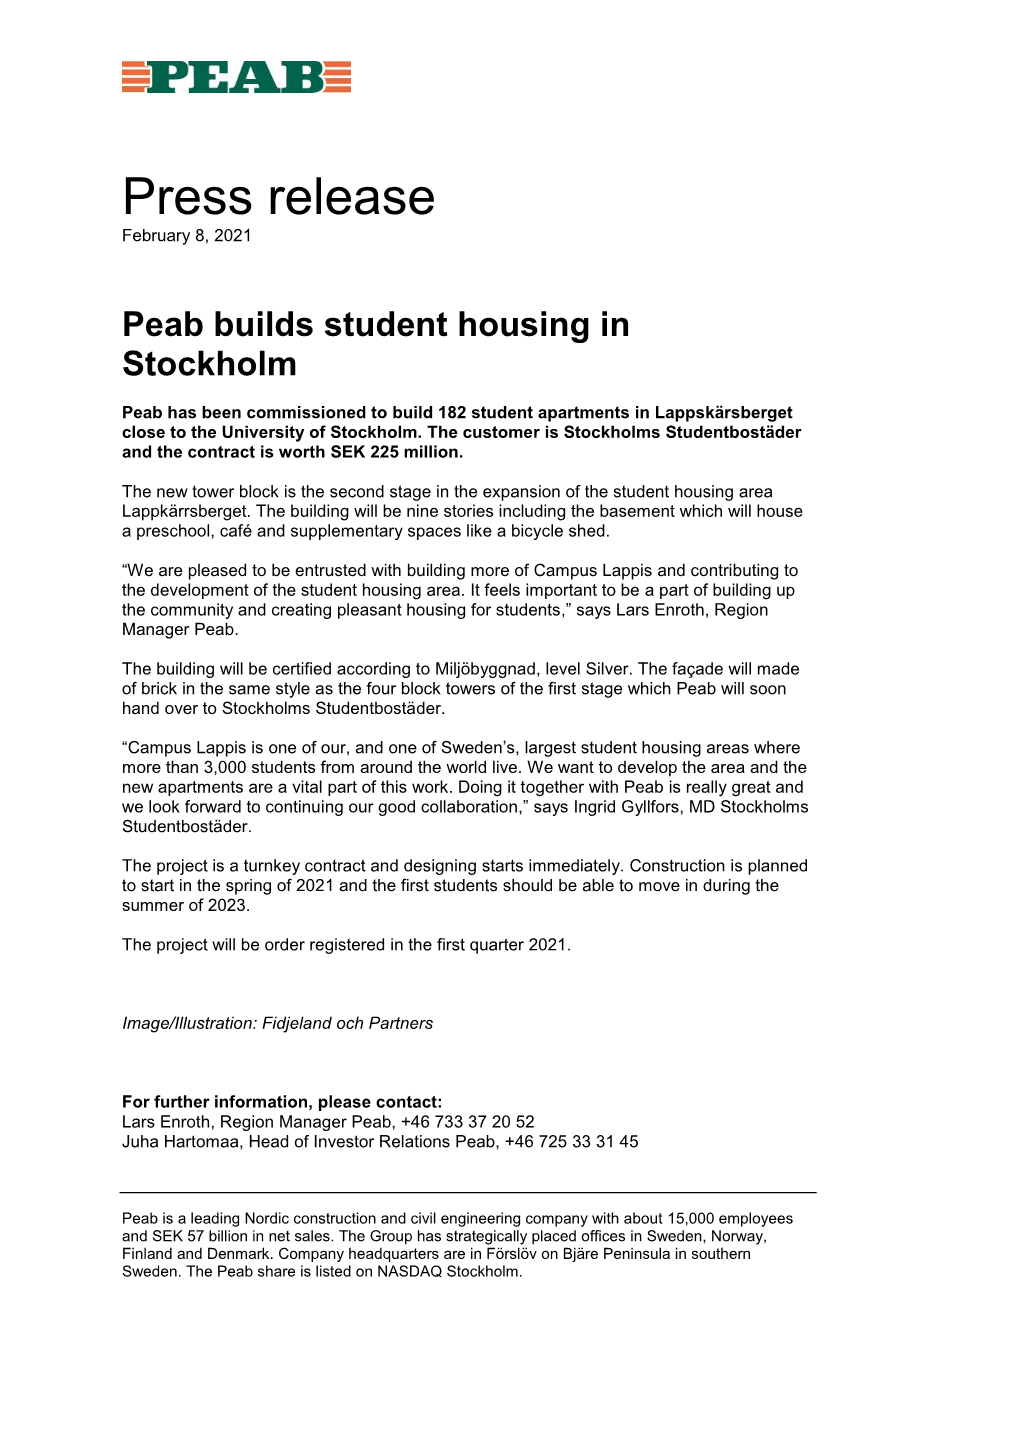 Peab Builds Student Housing in Stockholm